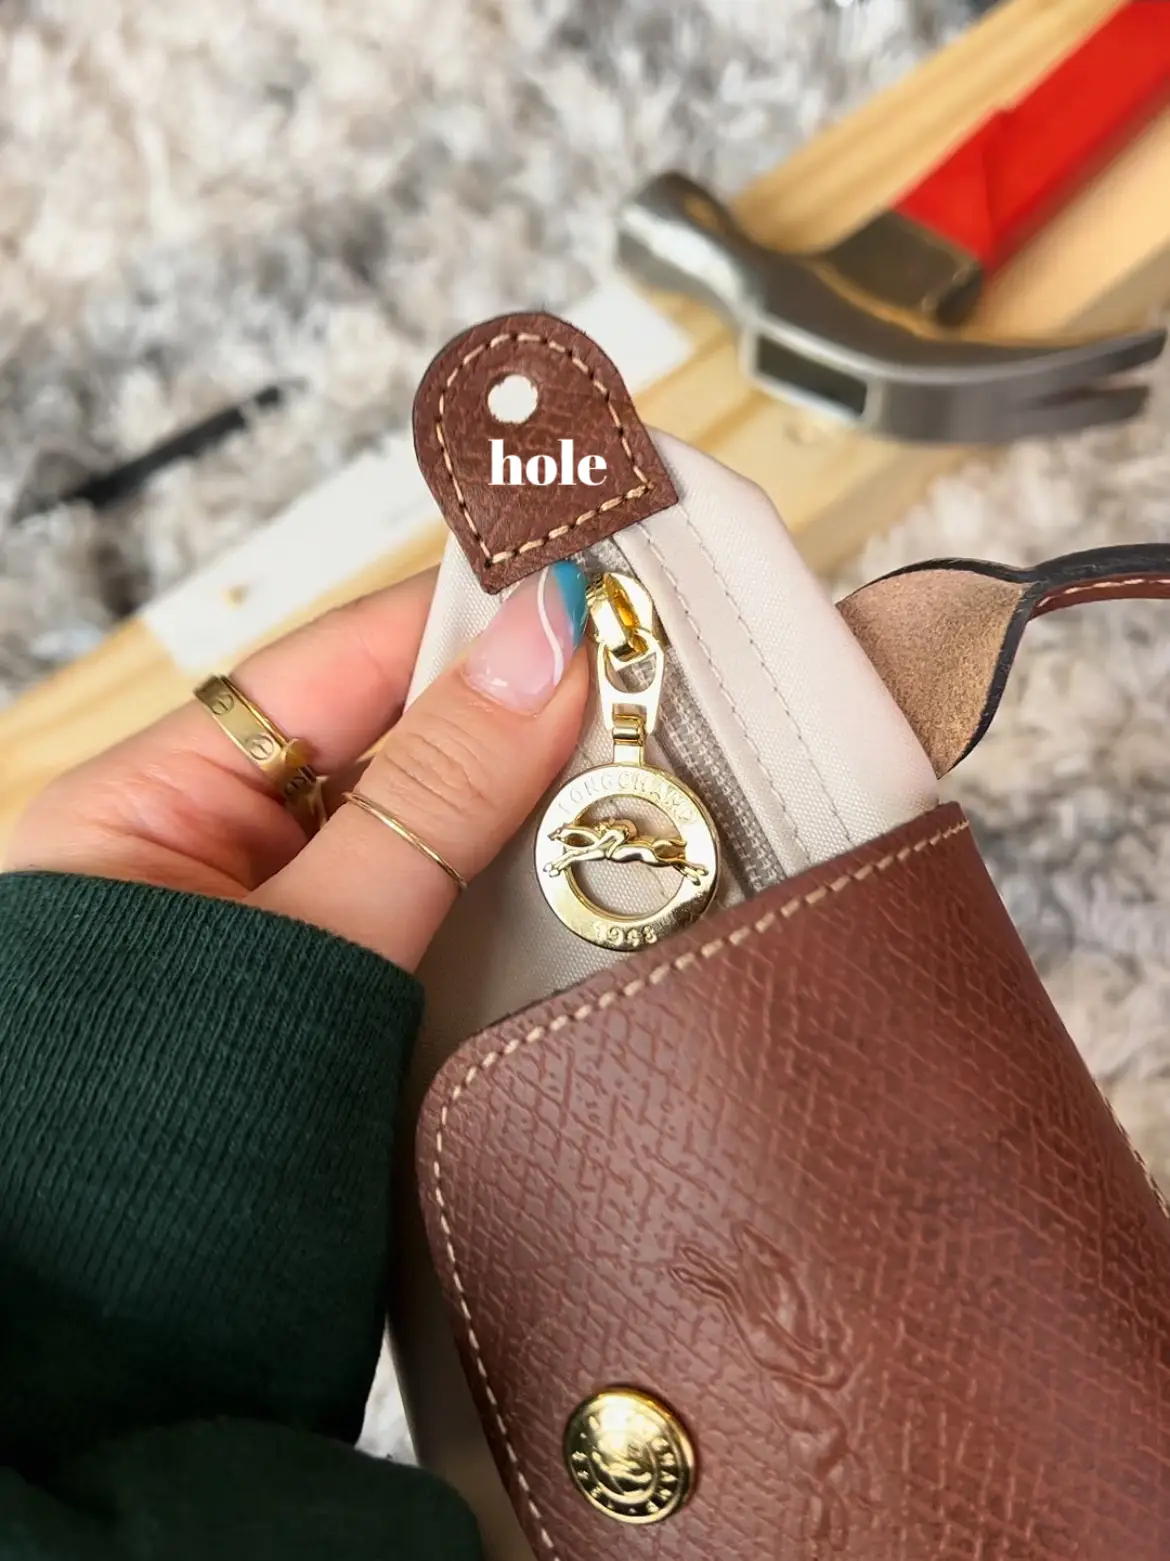 Finally received the strap attachment for my Longchamp Le Pliage pouch